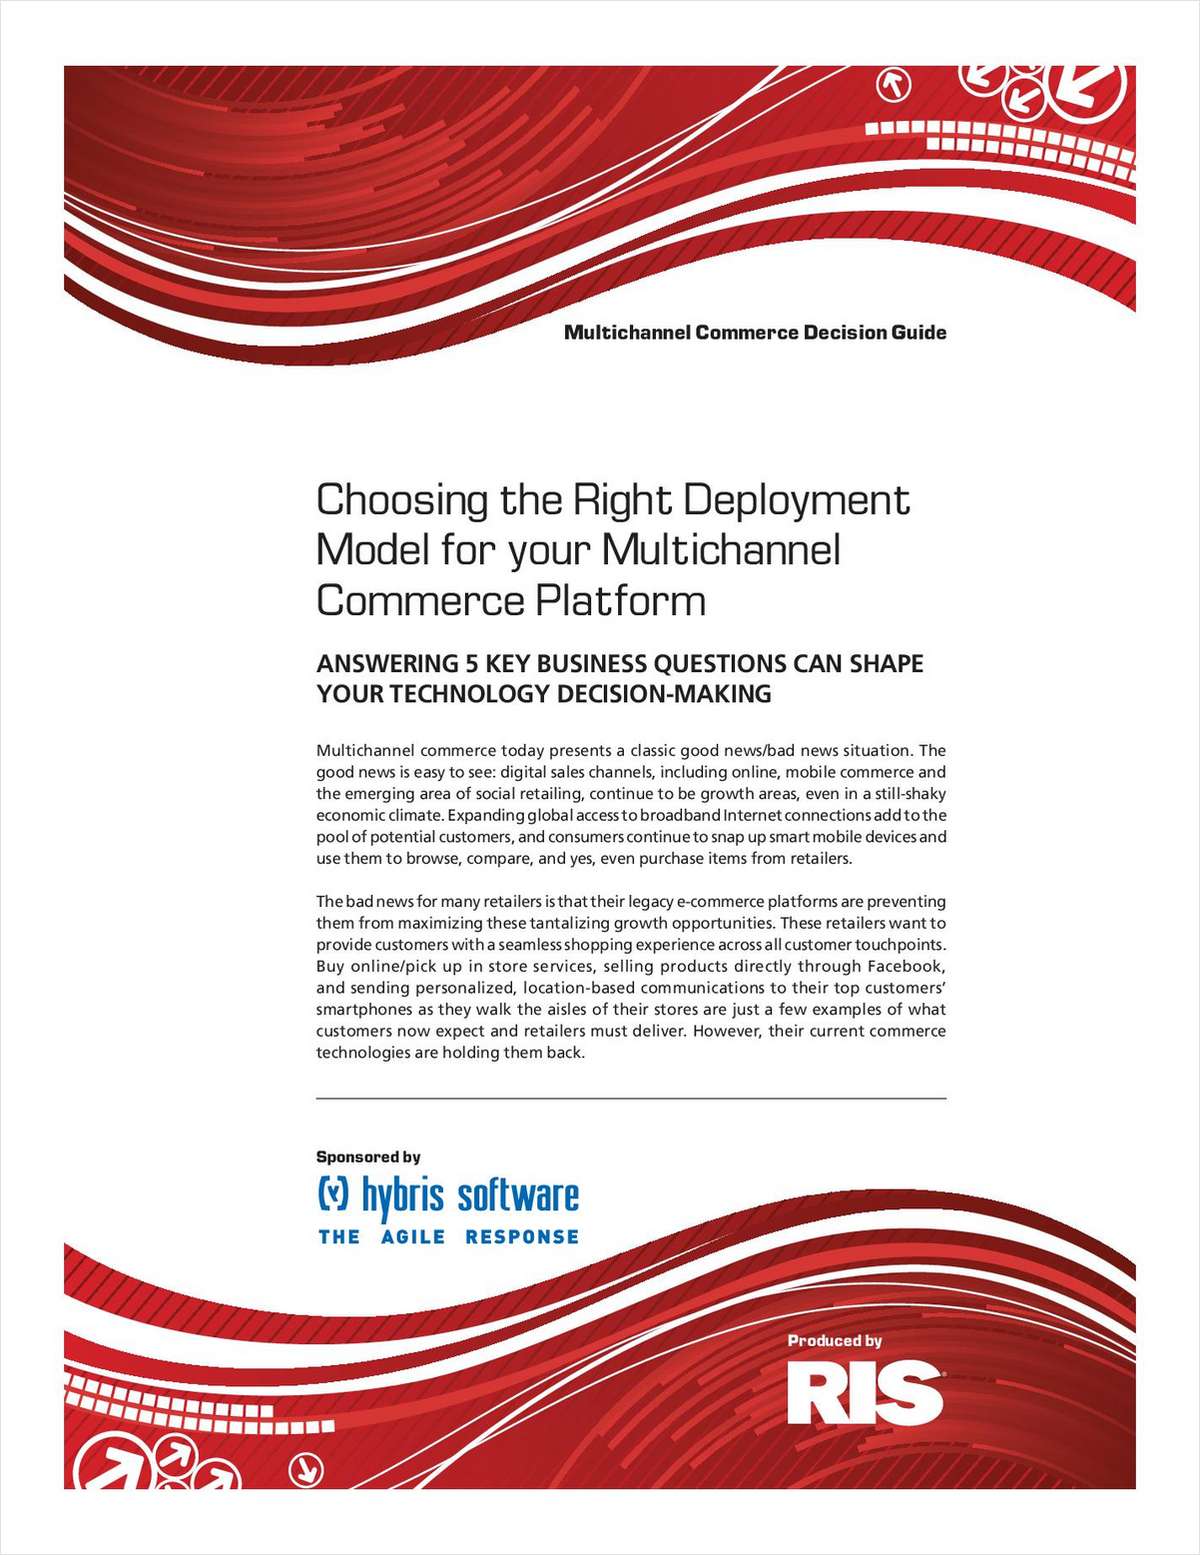 Choosing the Right Deployment Model for your B2C Multichannel Commerce Platform